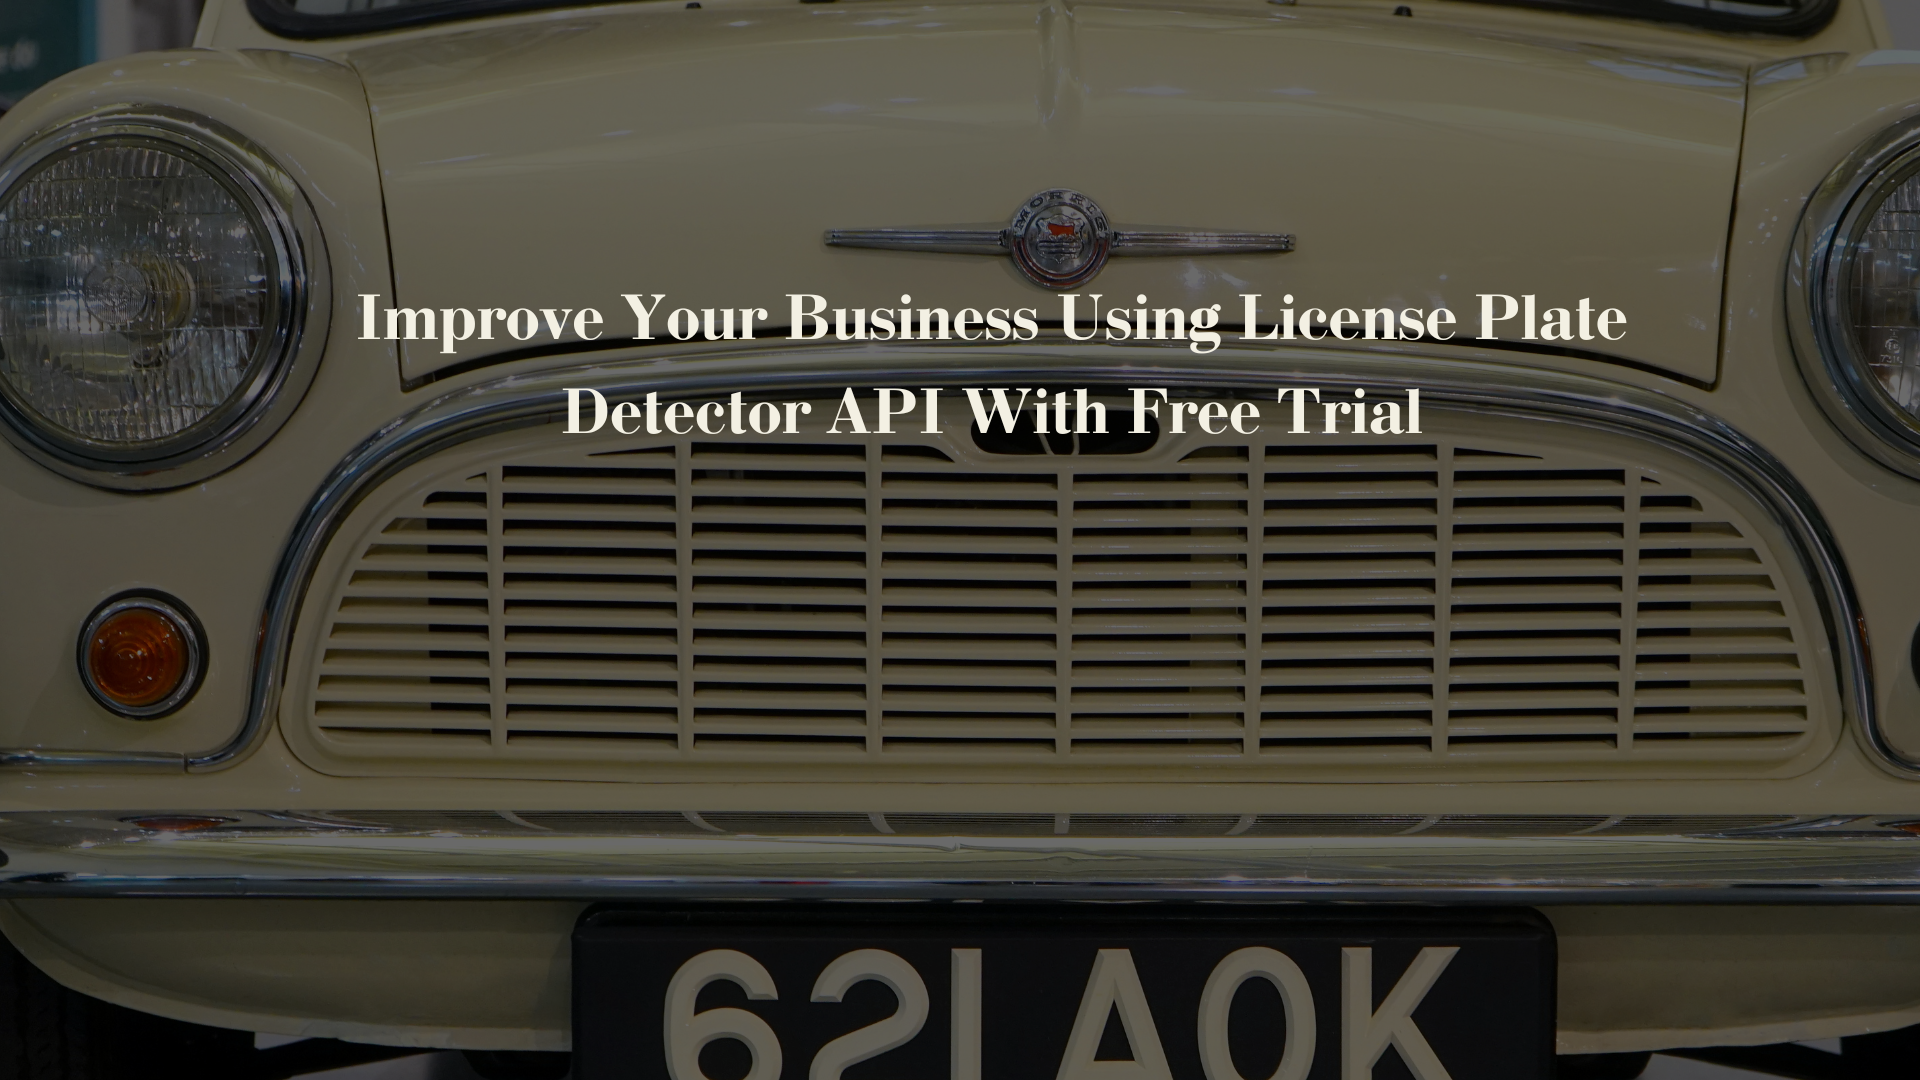 Improve Your Business Using License Plate Detector API With Free Trial